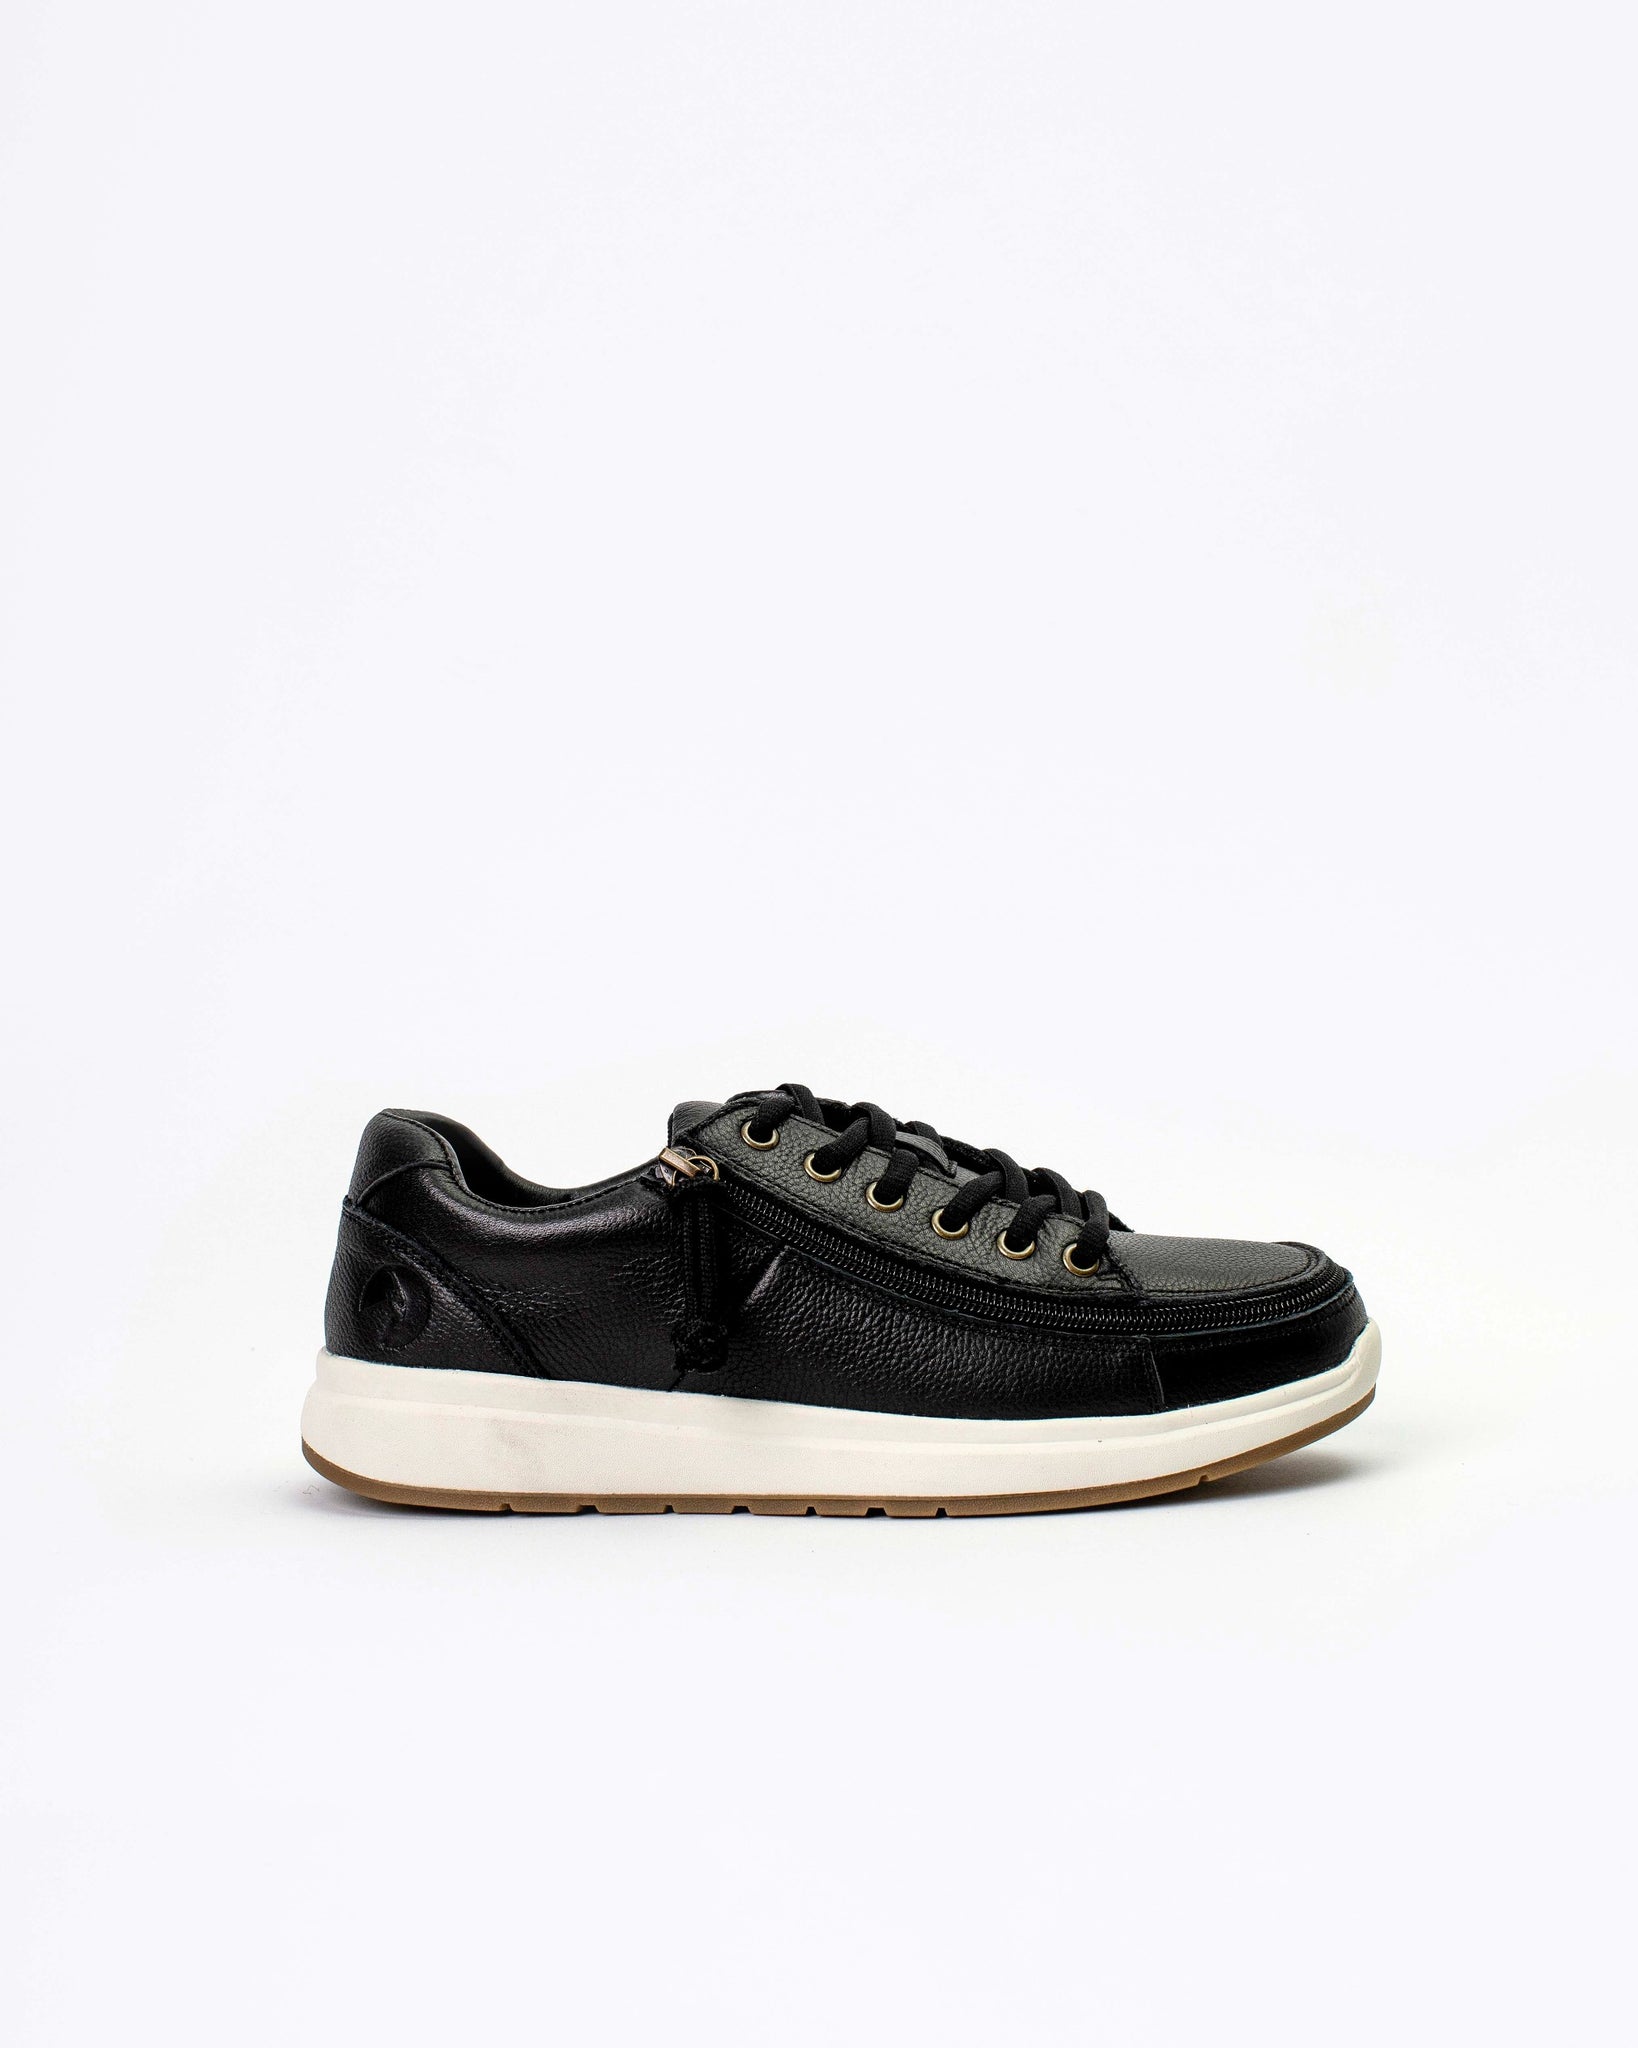 H&M Faux Leather Sneakers | Kingsway Mall